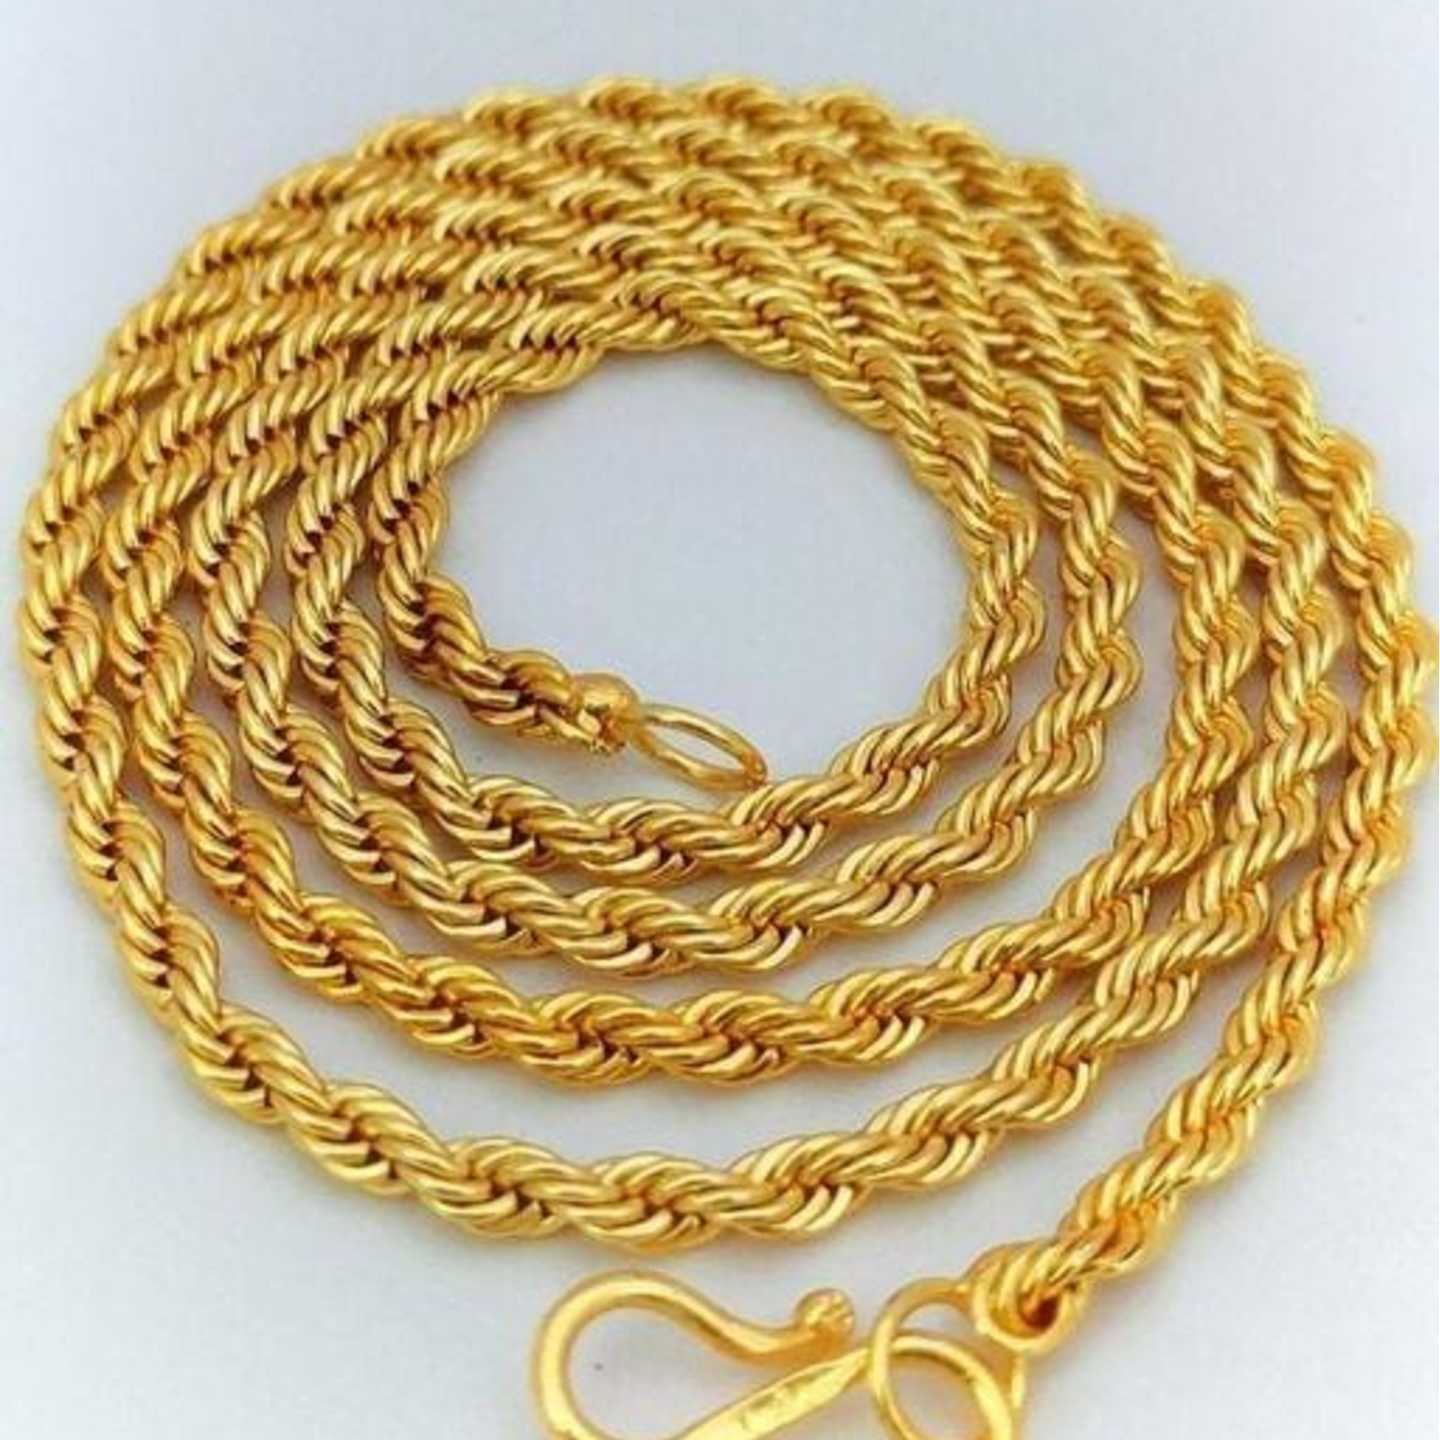  Gold Plated Rope Chain for Men & Women (30 , 28, 24, 18 inch) - free ship